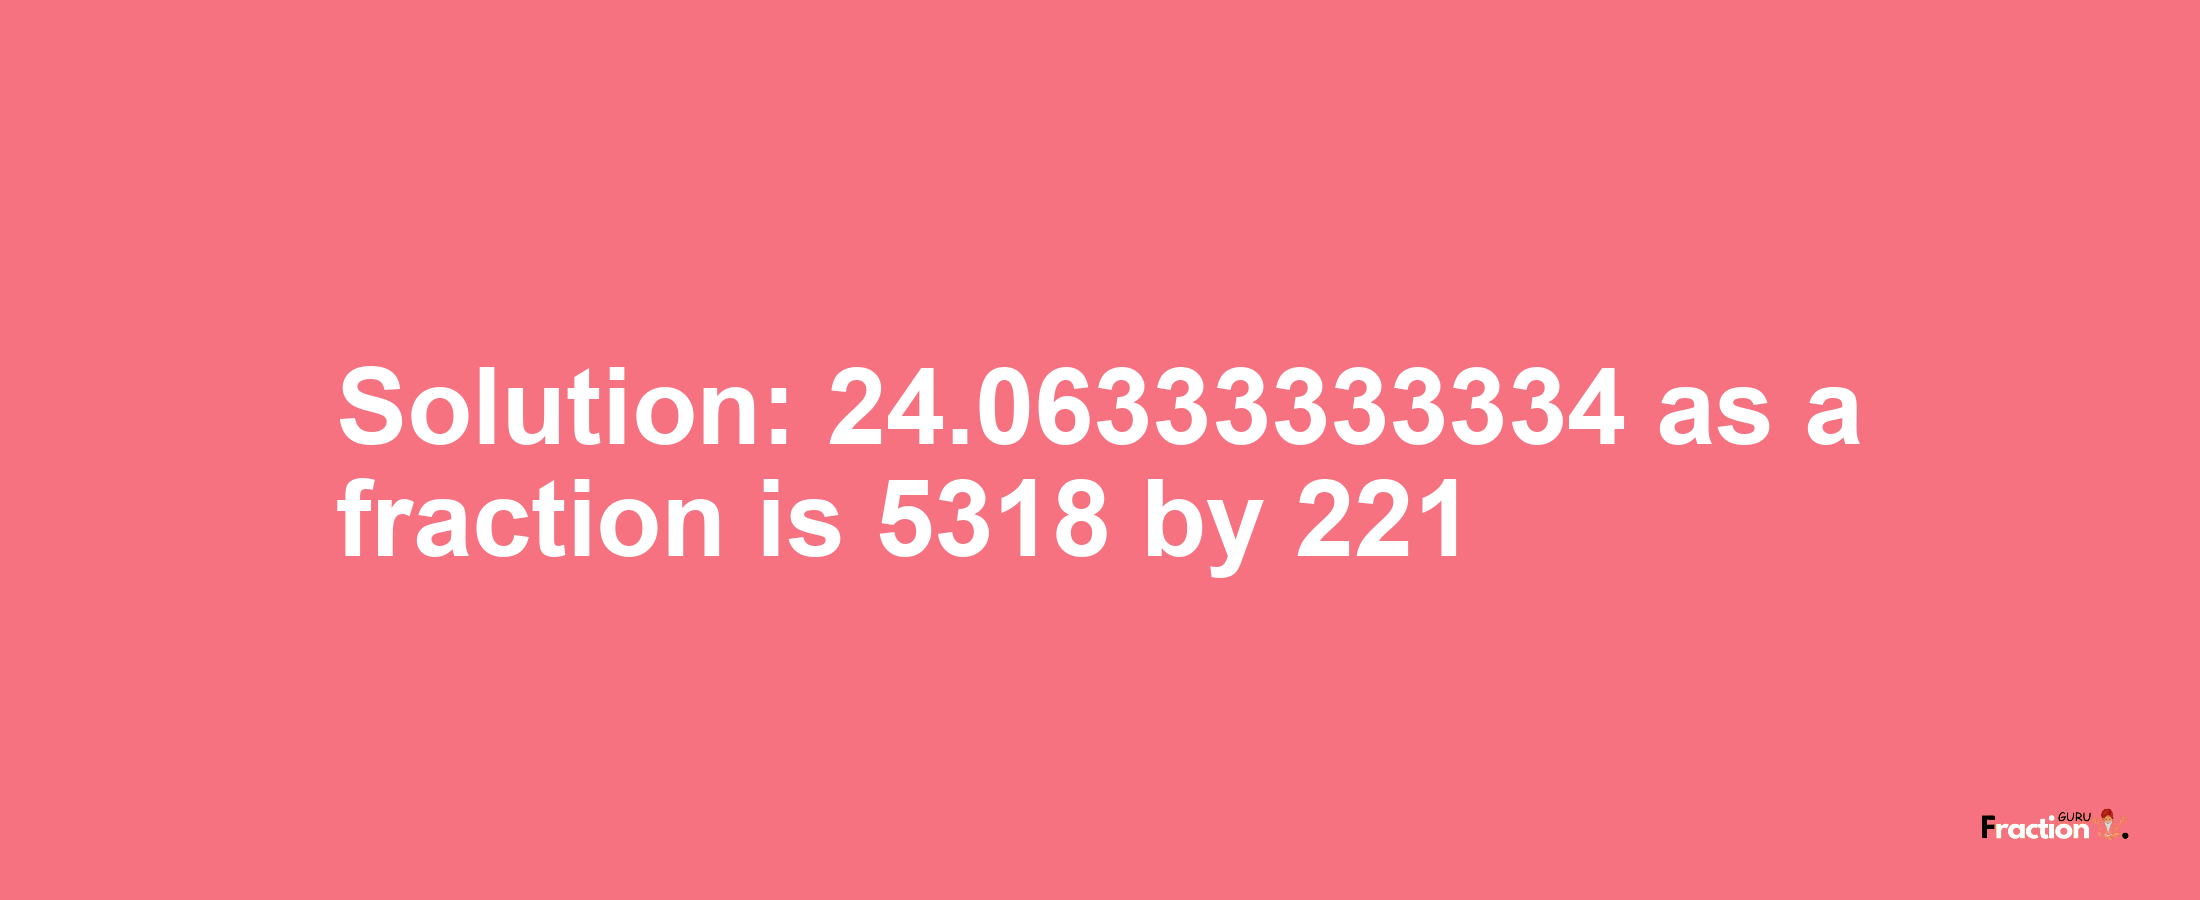 Solution:24.06333333334 as a fraction is 5318/221